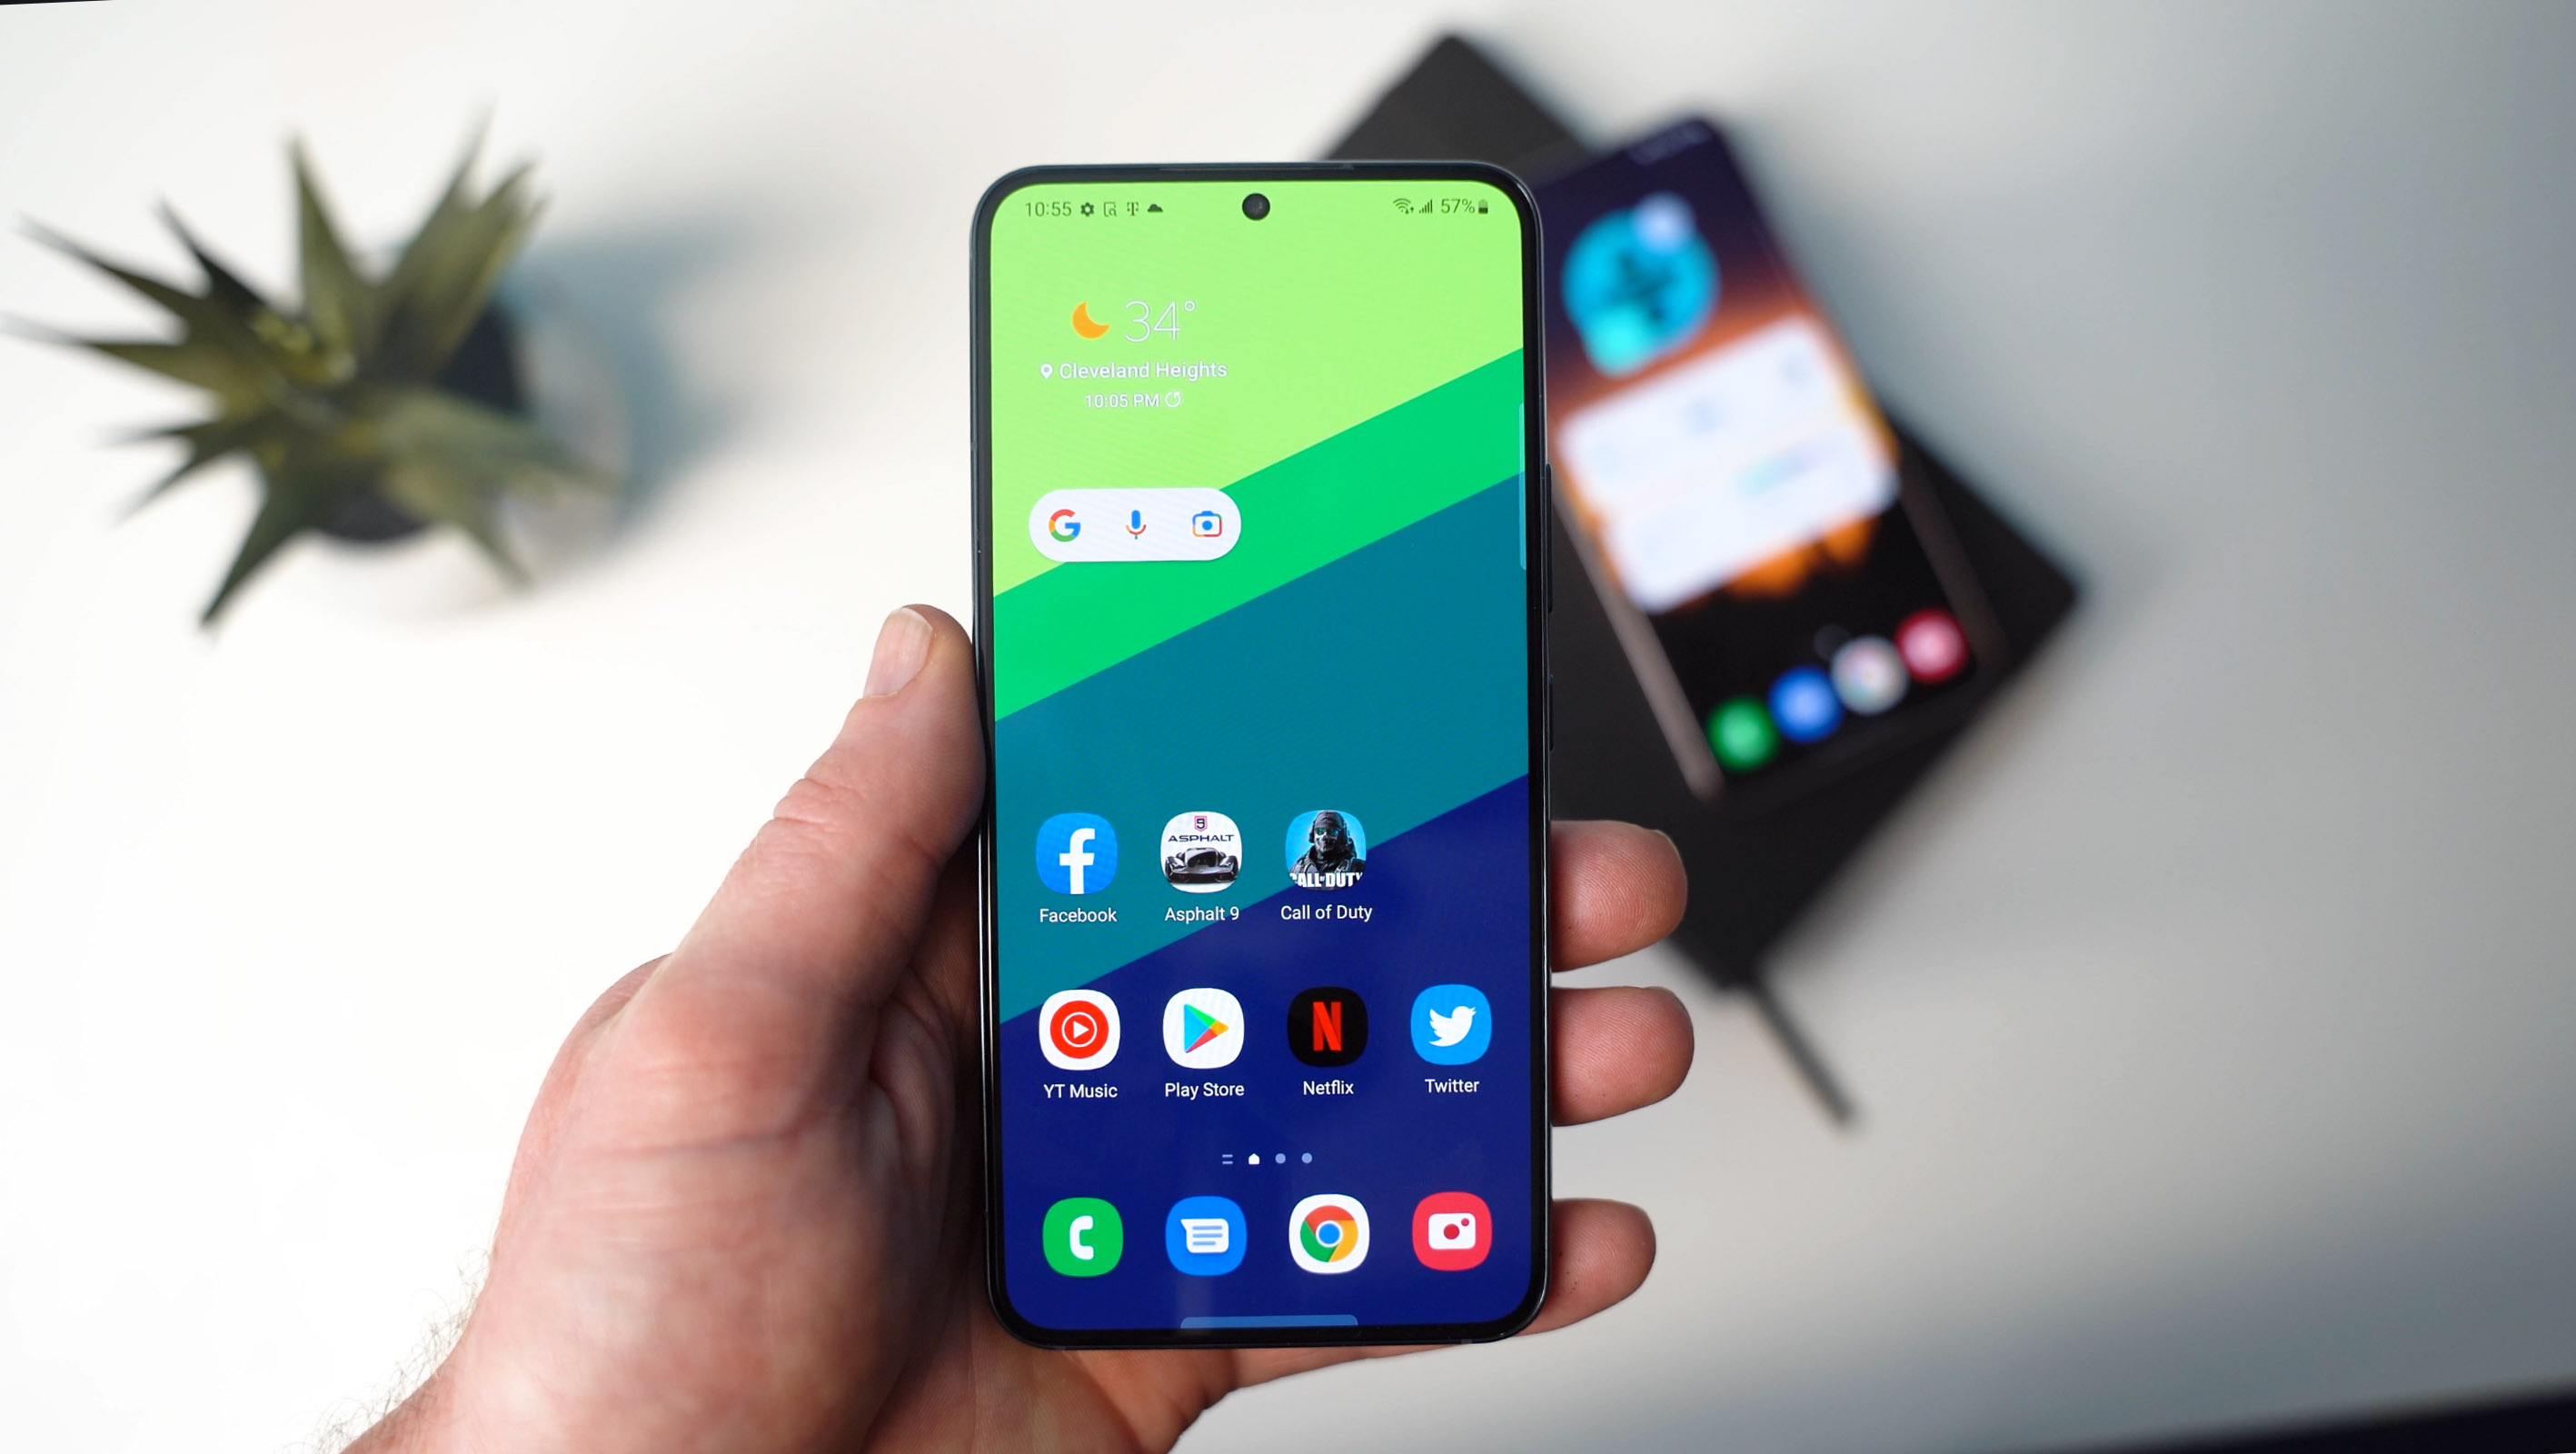 Galaxy AI is now making its way onto the Samsung Galaxy S22